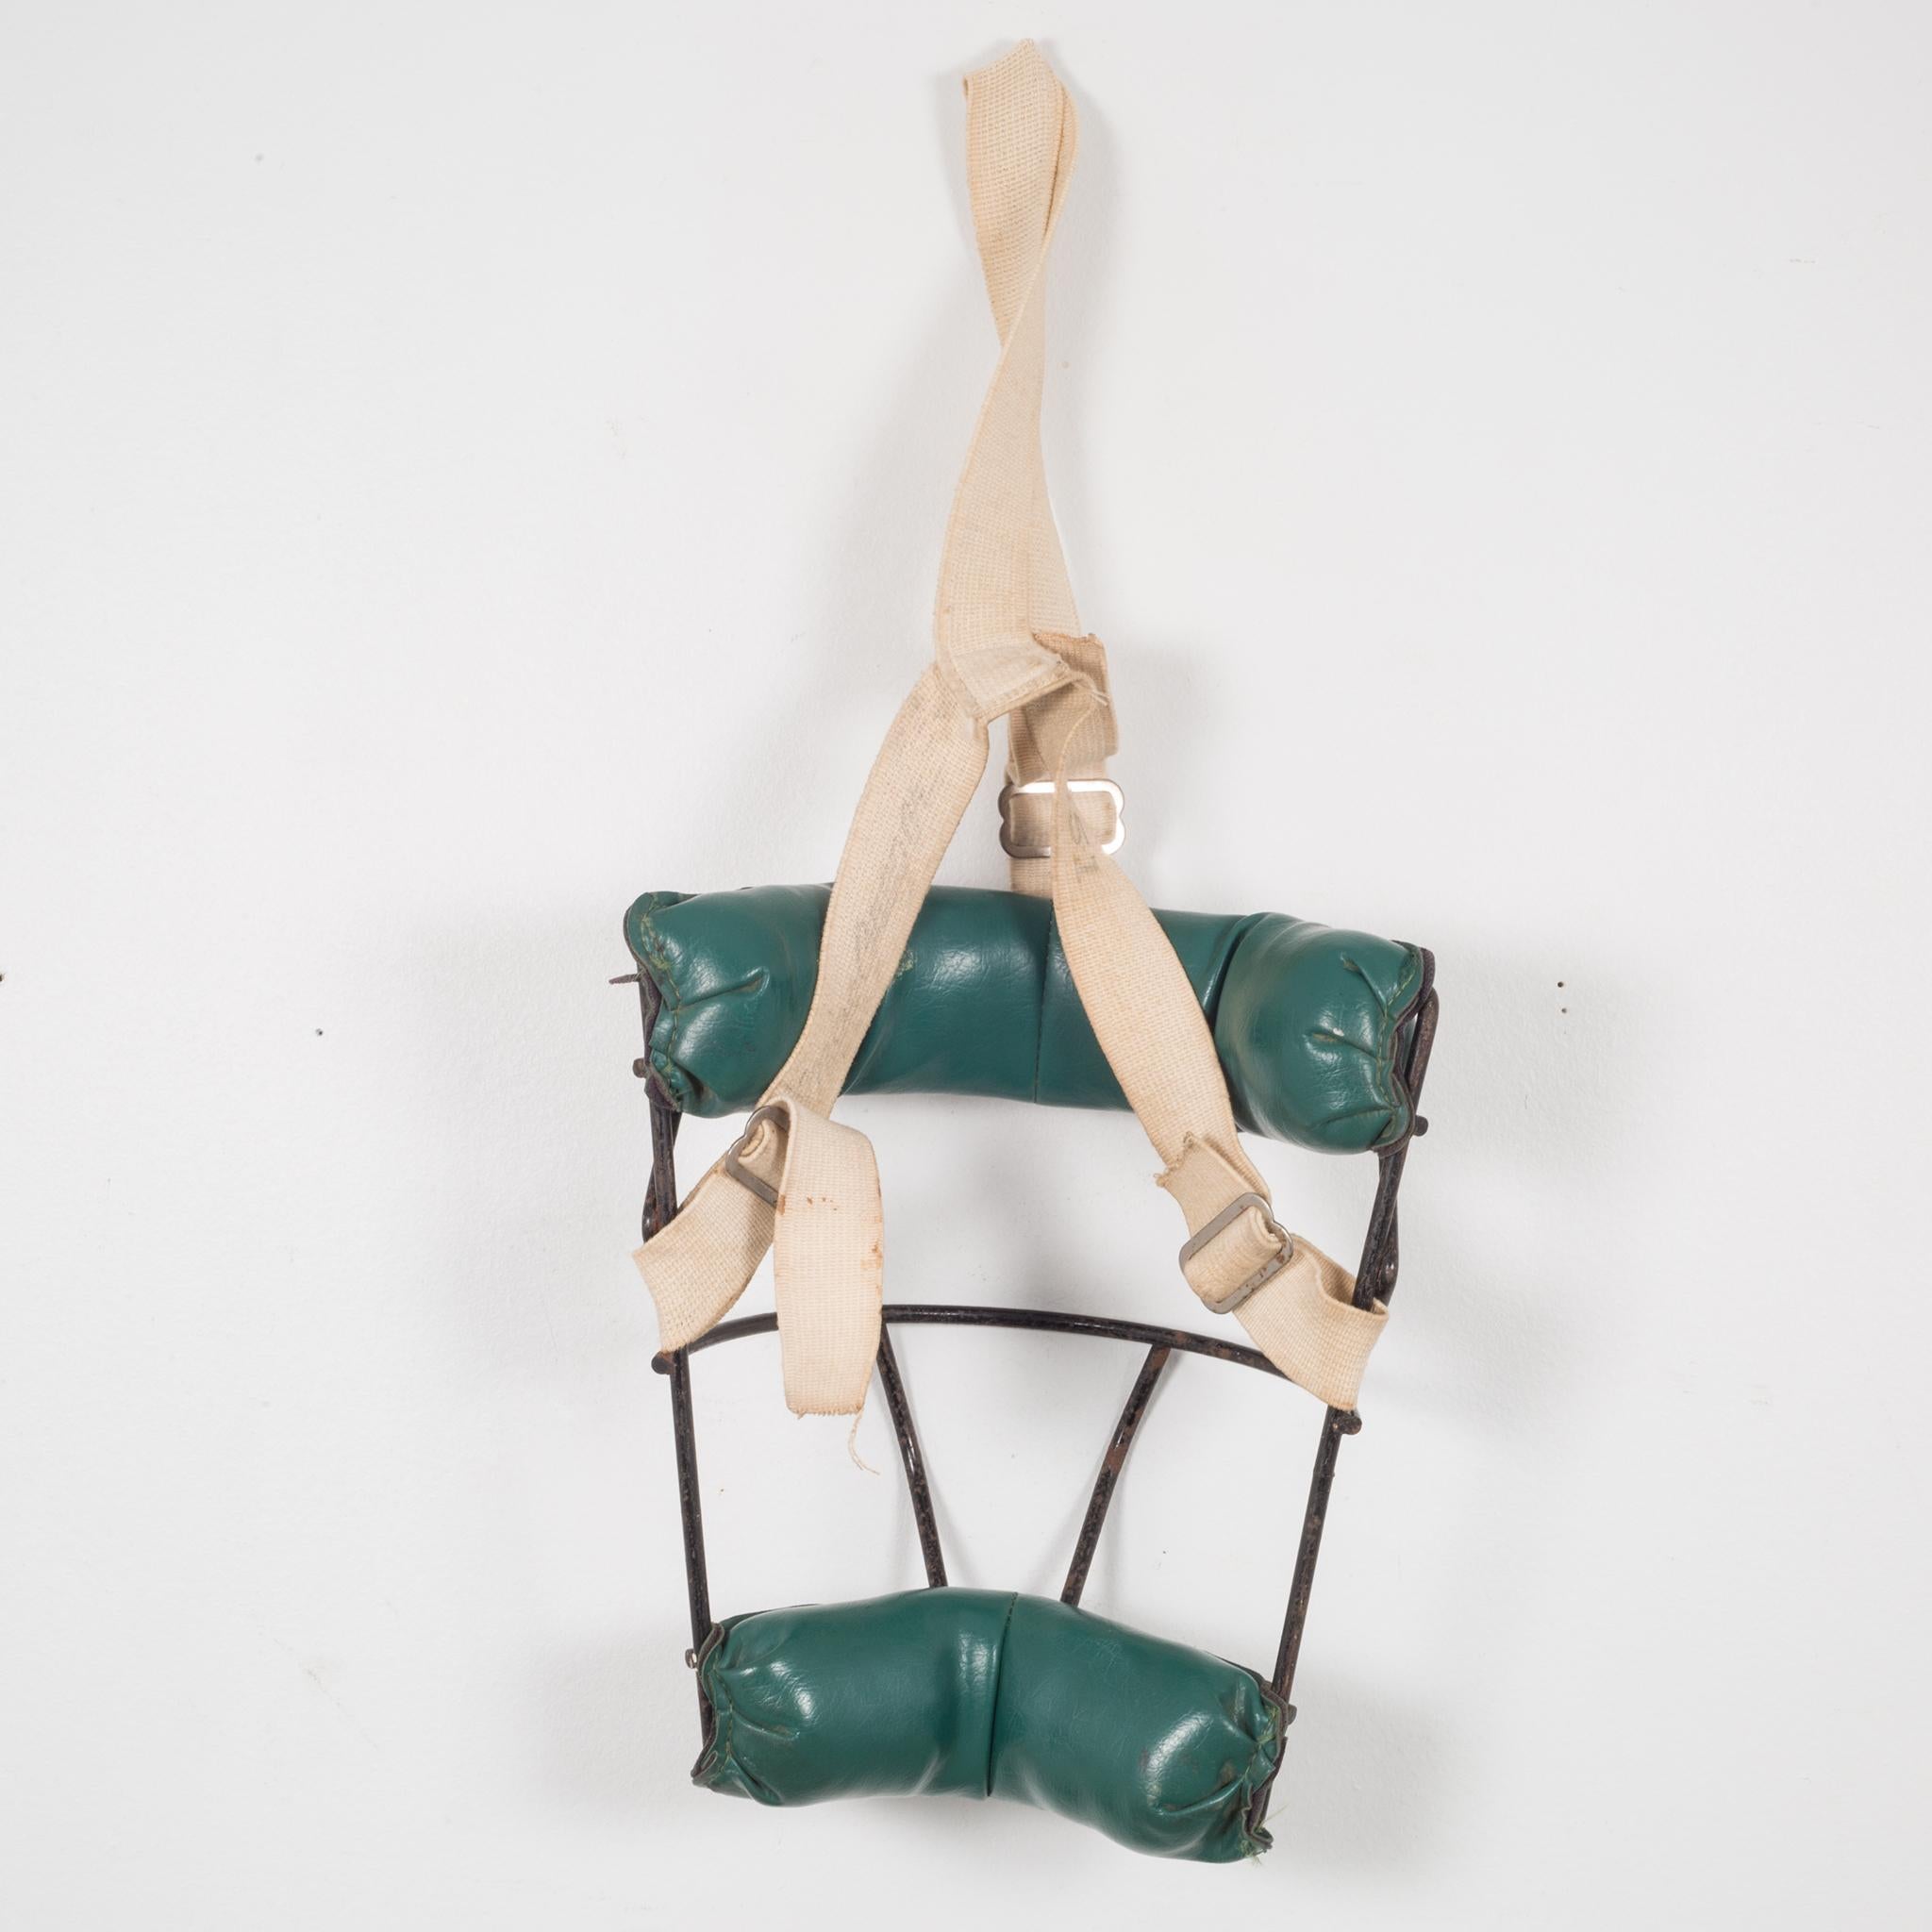 American Vintage Steel and Green Leather Catcher's Mask, c.1920